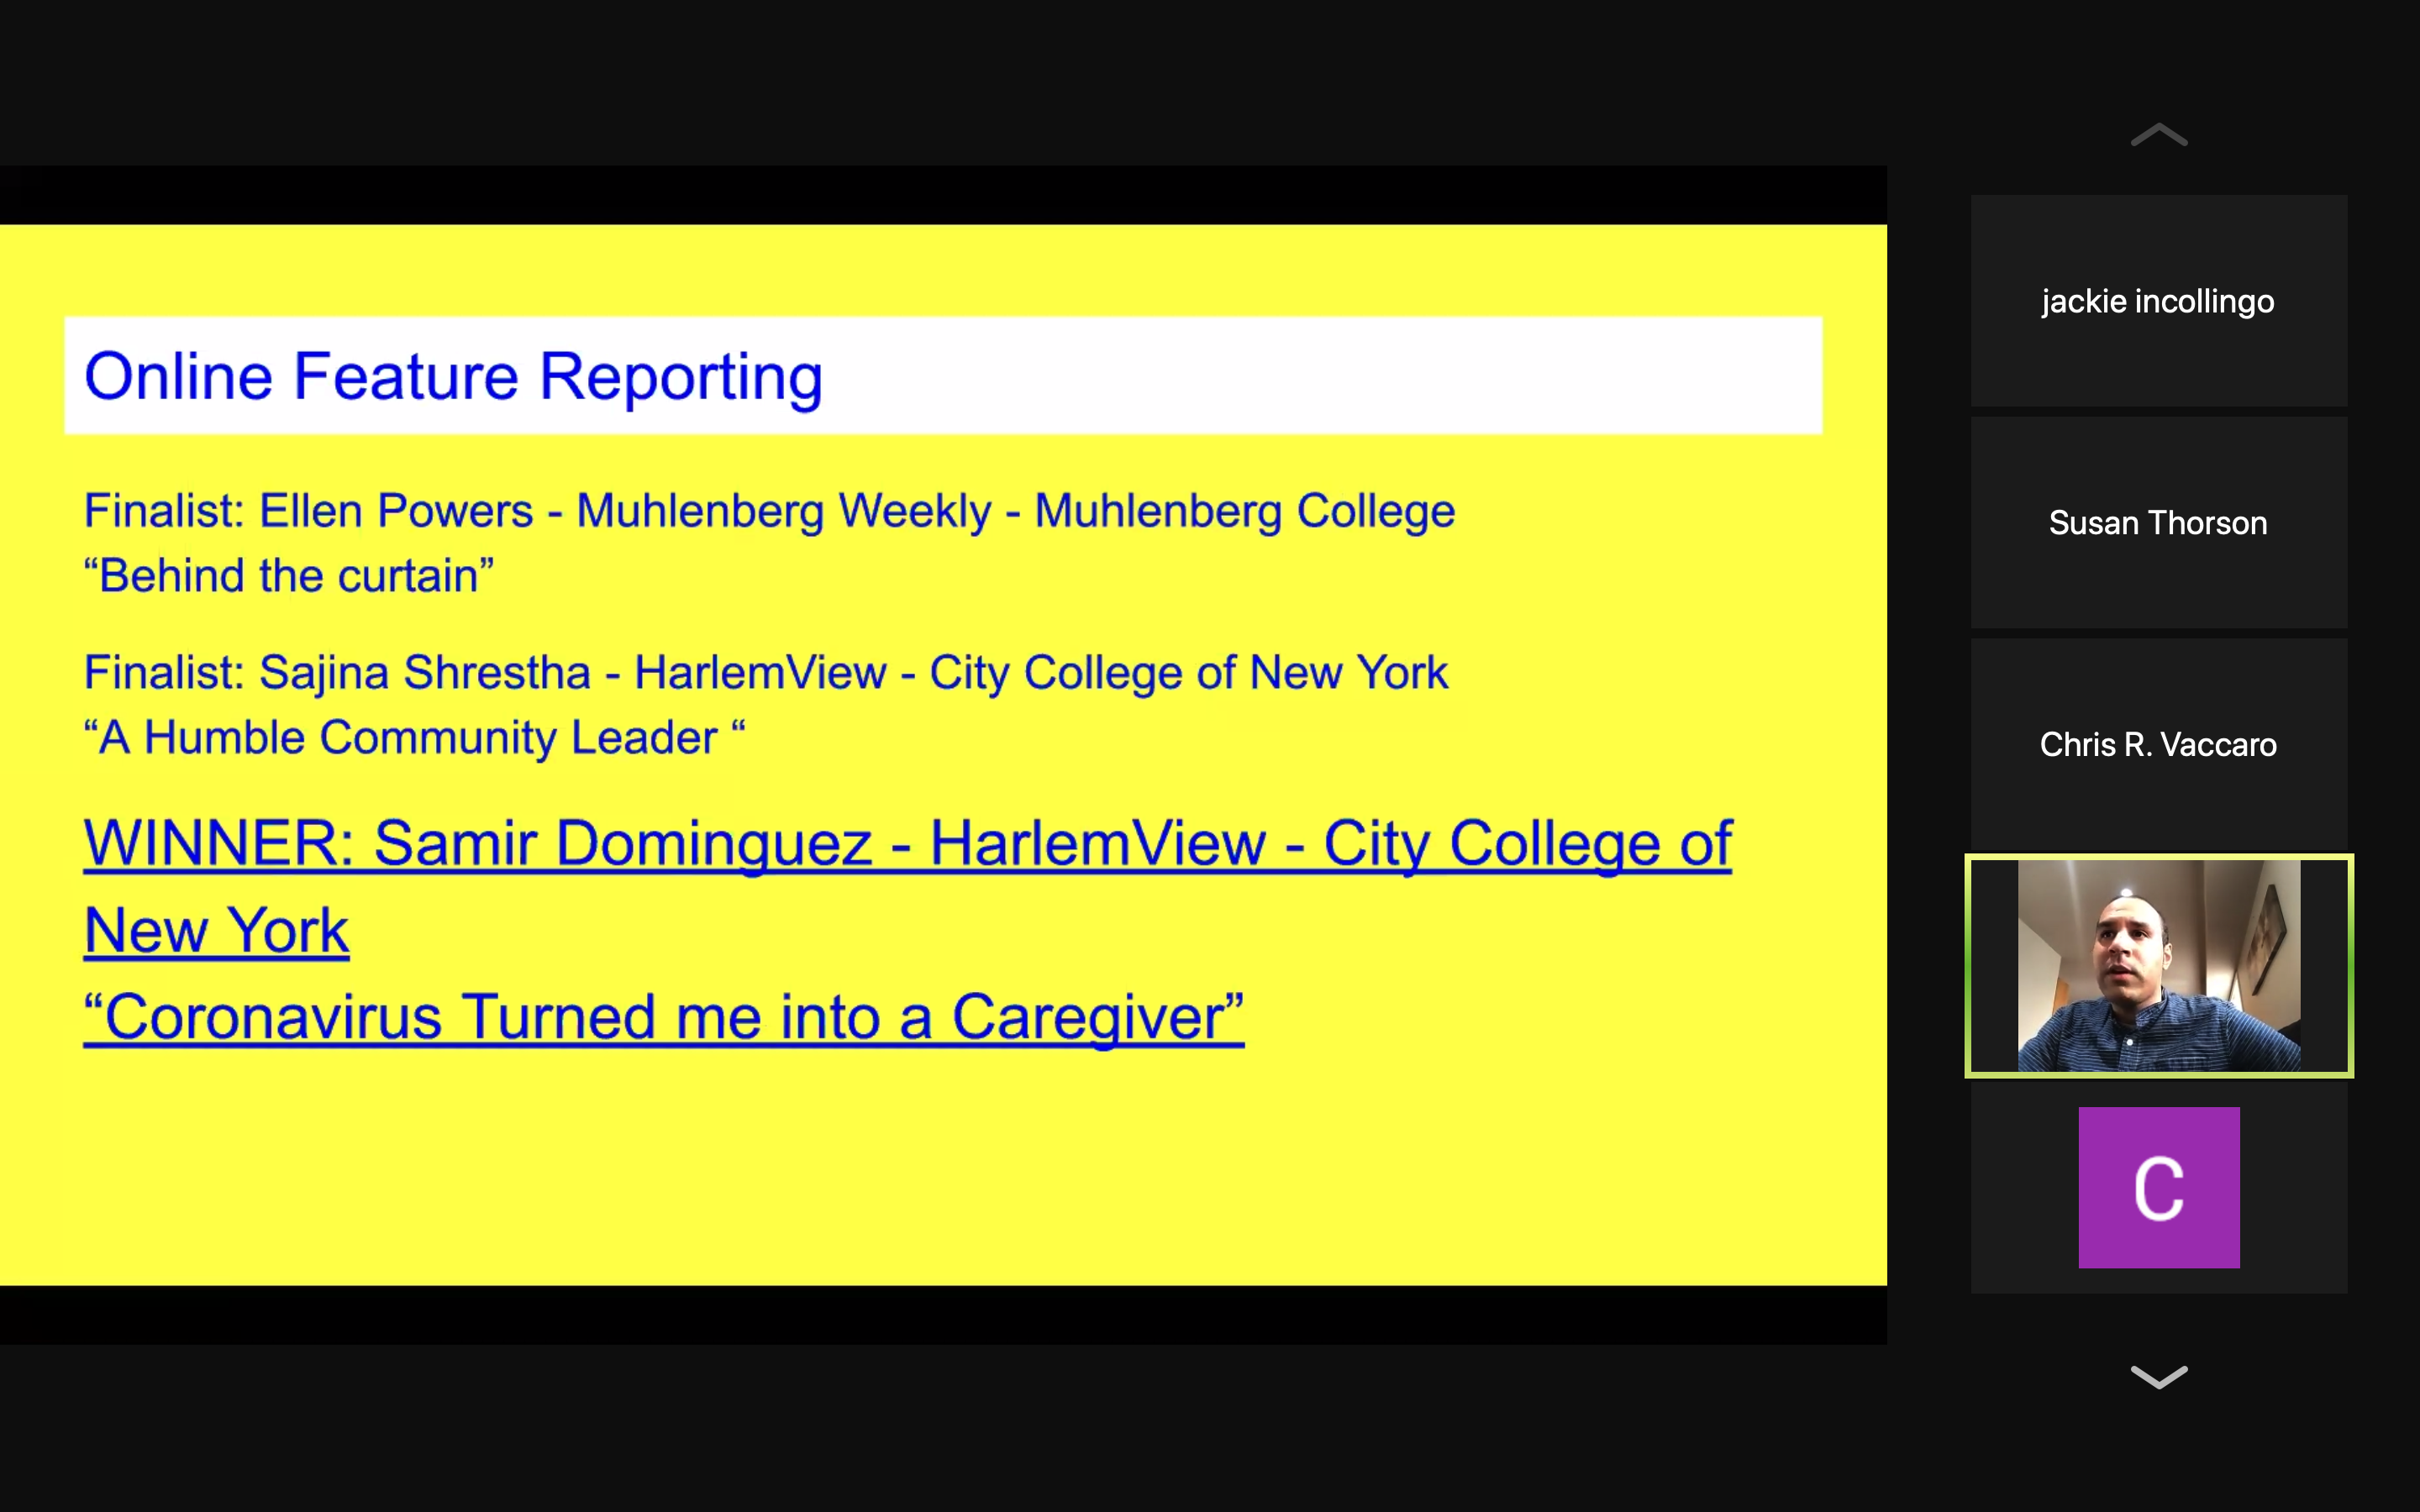 Online Feature Reporting announcement 